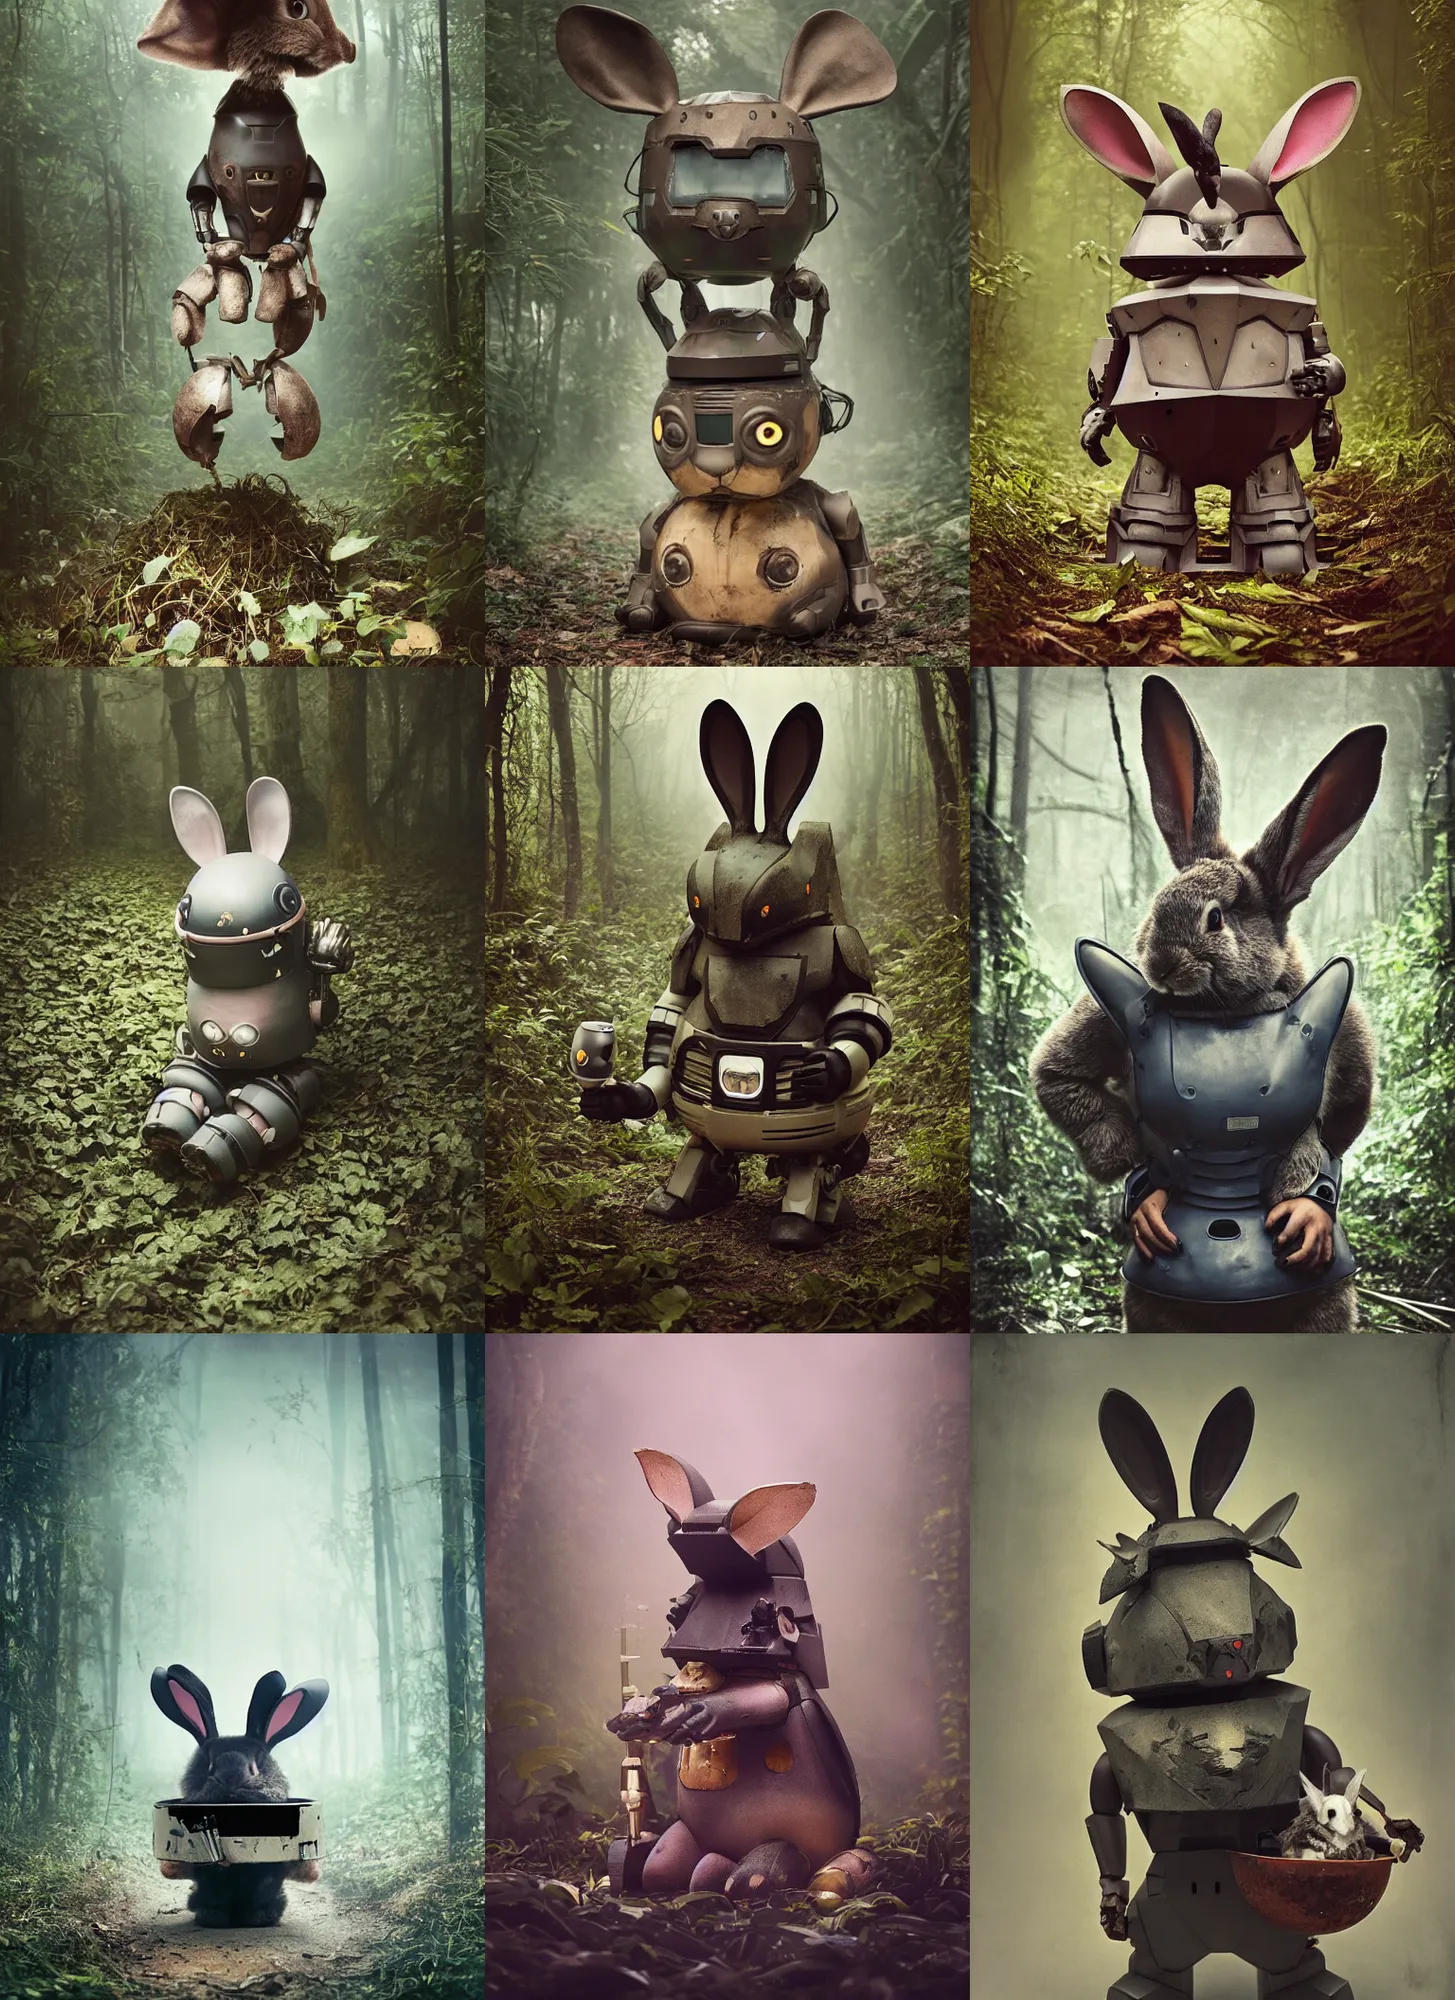 Prompt: dark night oversized battle rabbit robot chubby fatmech bucket bowl with big ears with rabbit sitting inside, in jungle forest, full body, nighttime, cinematic focus, polaroid photo, vintage, neutral dull colors, soft lights, foggy, overcast by oleg oprisco, by thomas peschak, by discovery channel, by victor enrich, by gregory crewdson